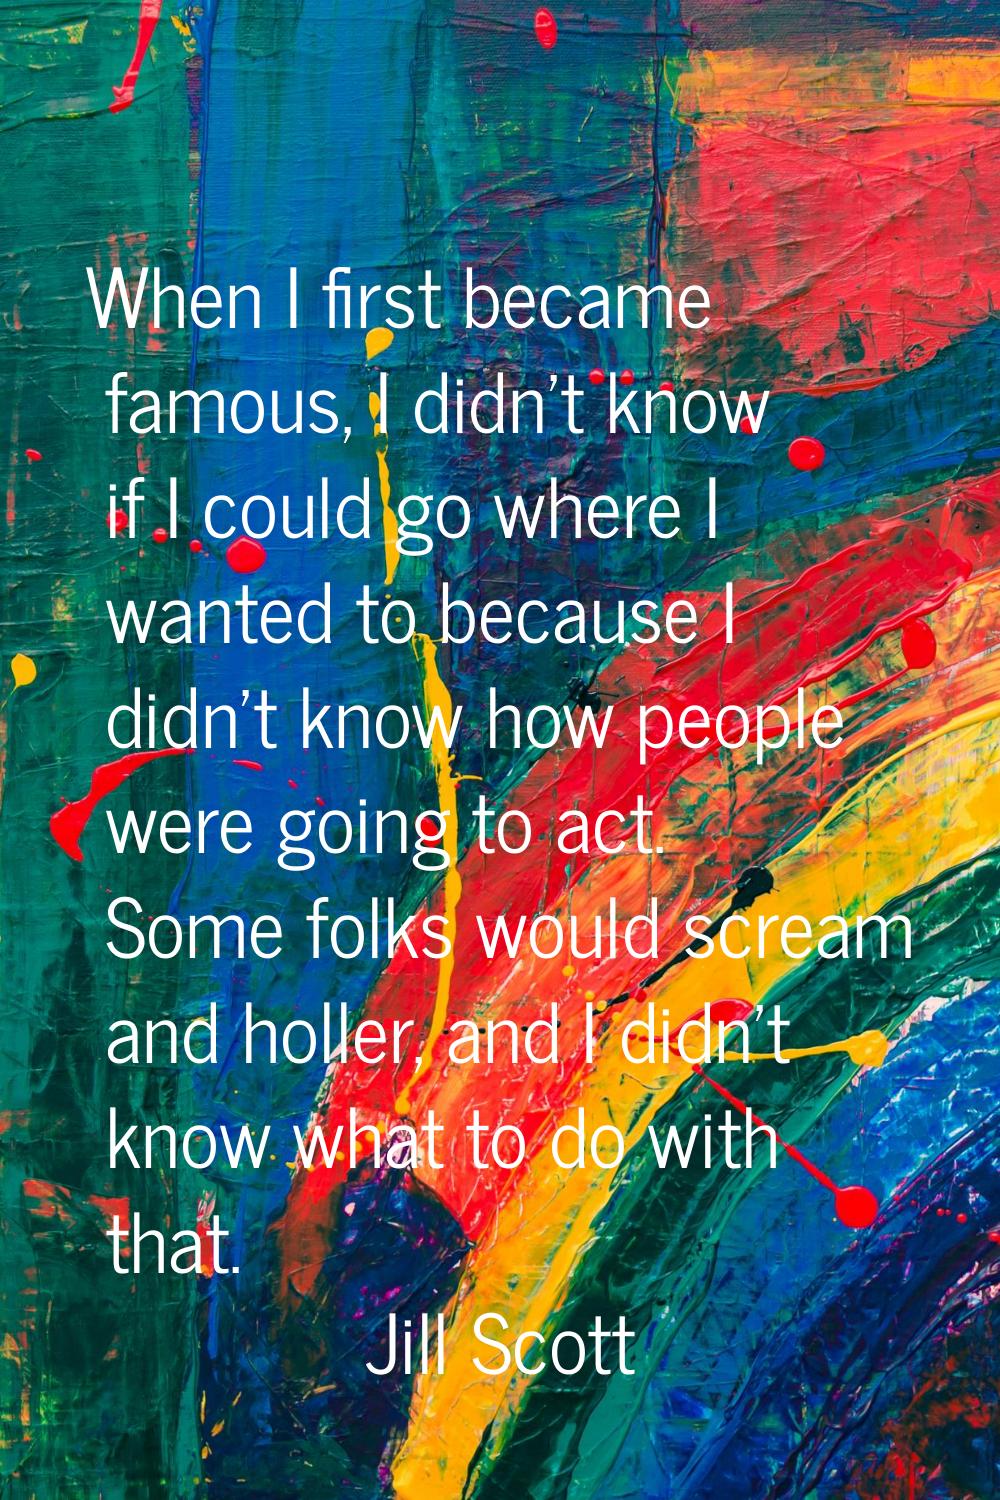 When I first became famous, I didn't know if I could go where I wanted to because I didn't know how